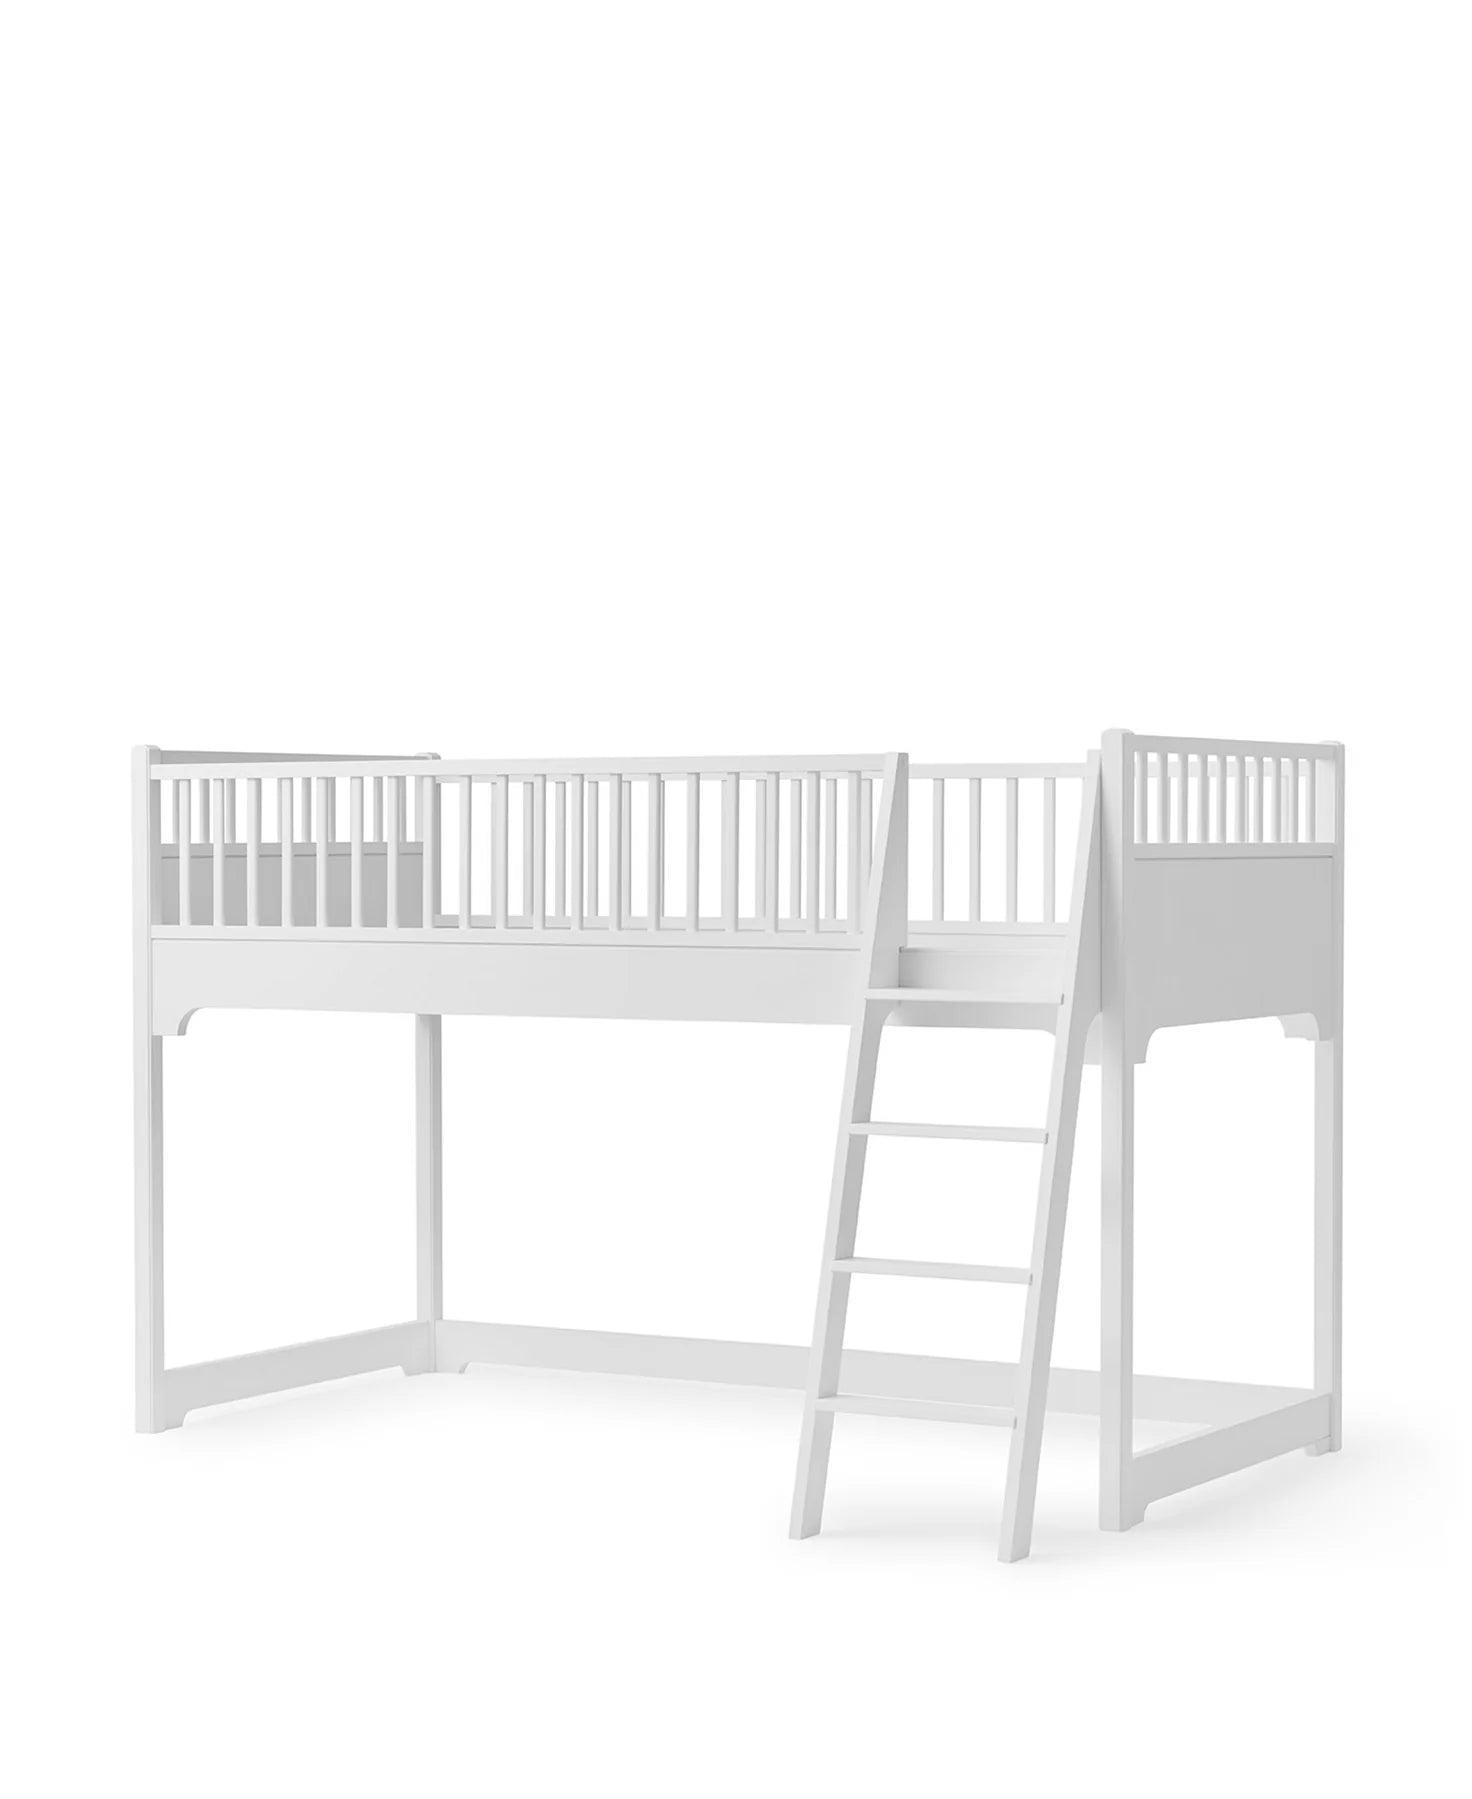 Oliver Furniture - Classic Seaside halbhohes Bett in weiss